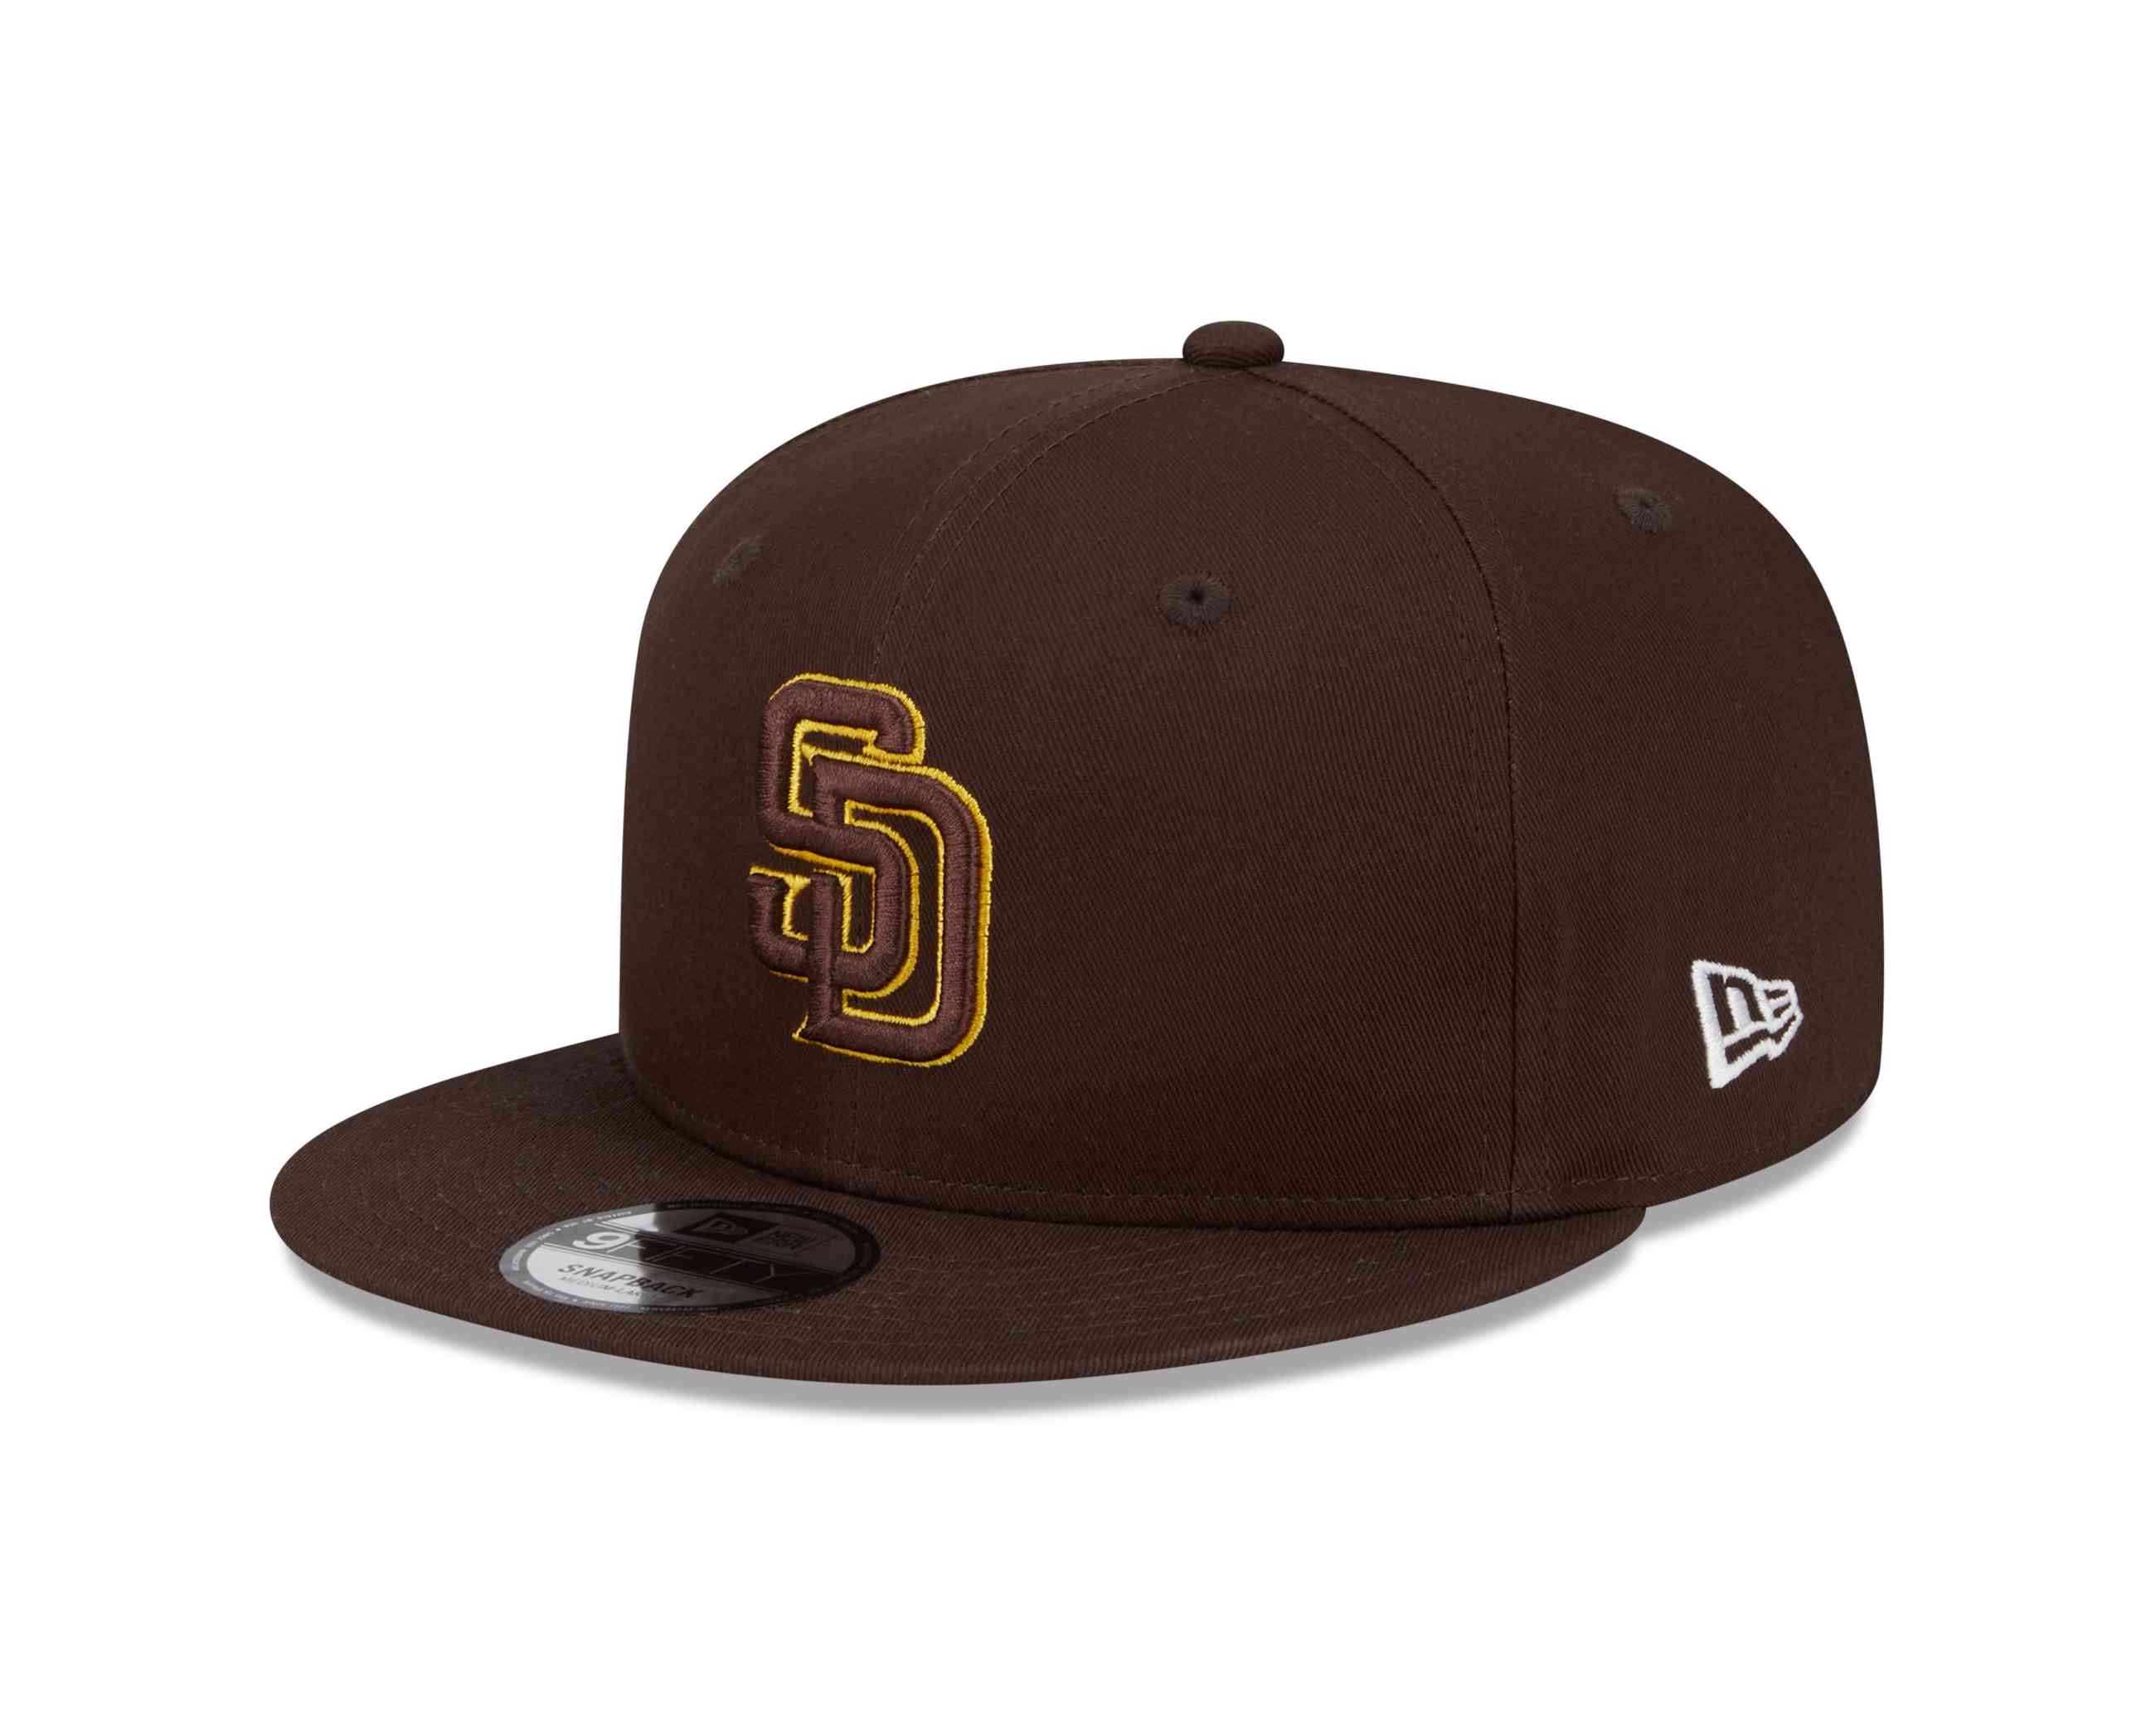 New Era - MLB San Diego Padres Side Patch 9Fifty Snapback Cap